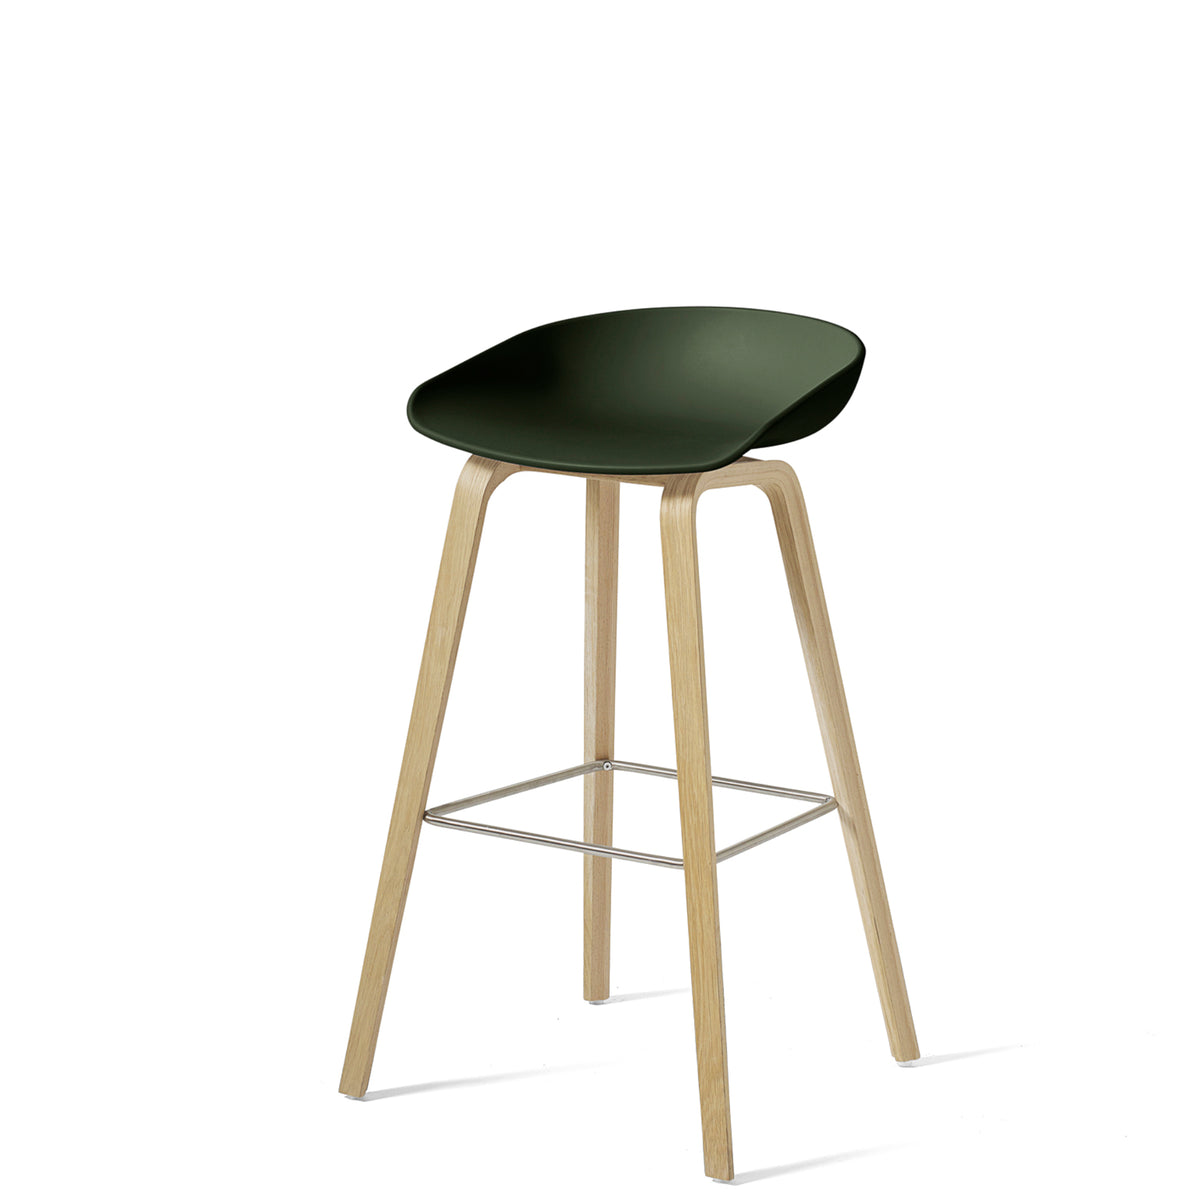 HAY About A Stool AAS32 850mm Green Matt Lacquered Oak Base